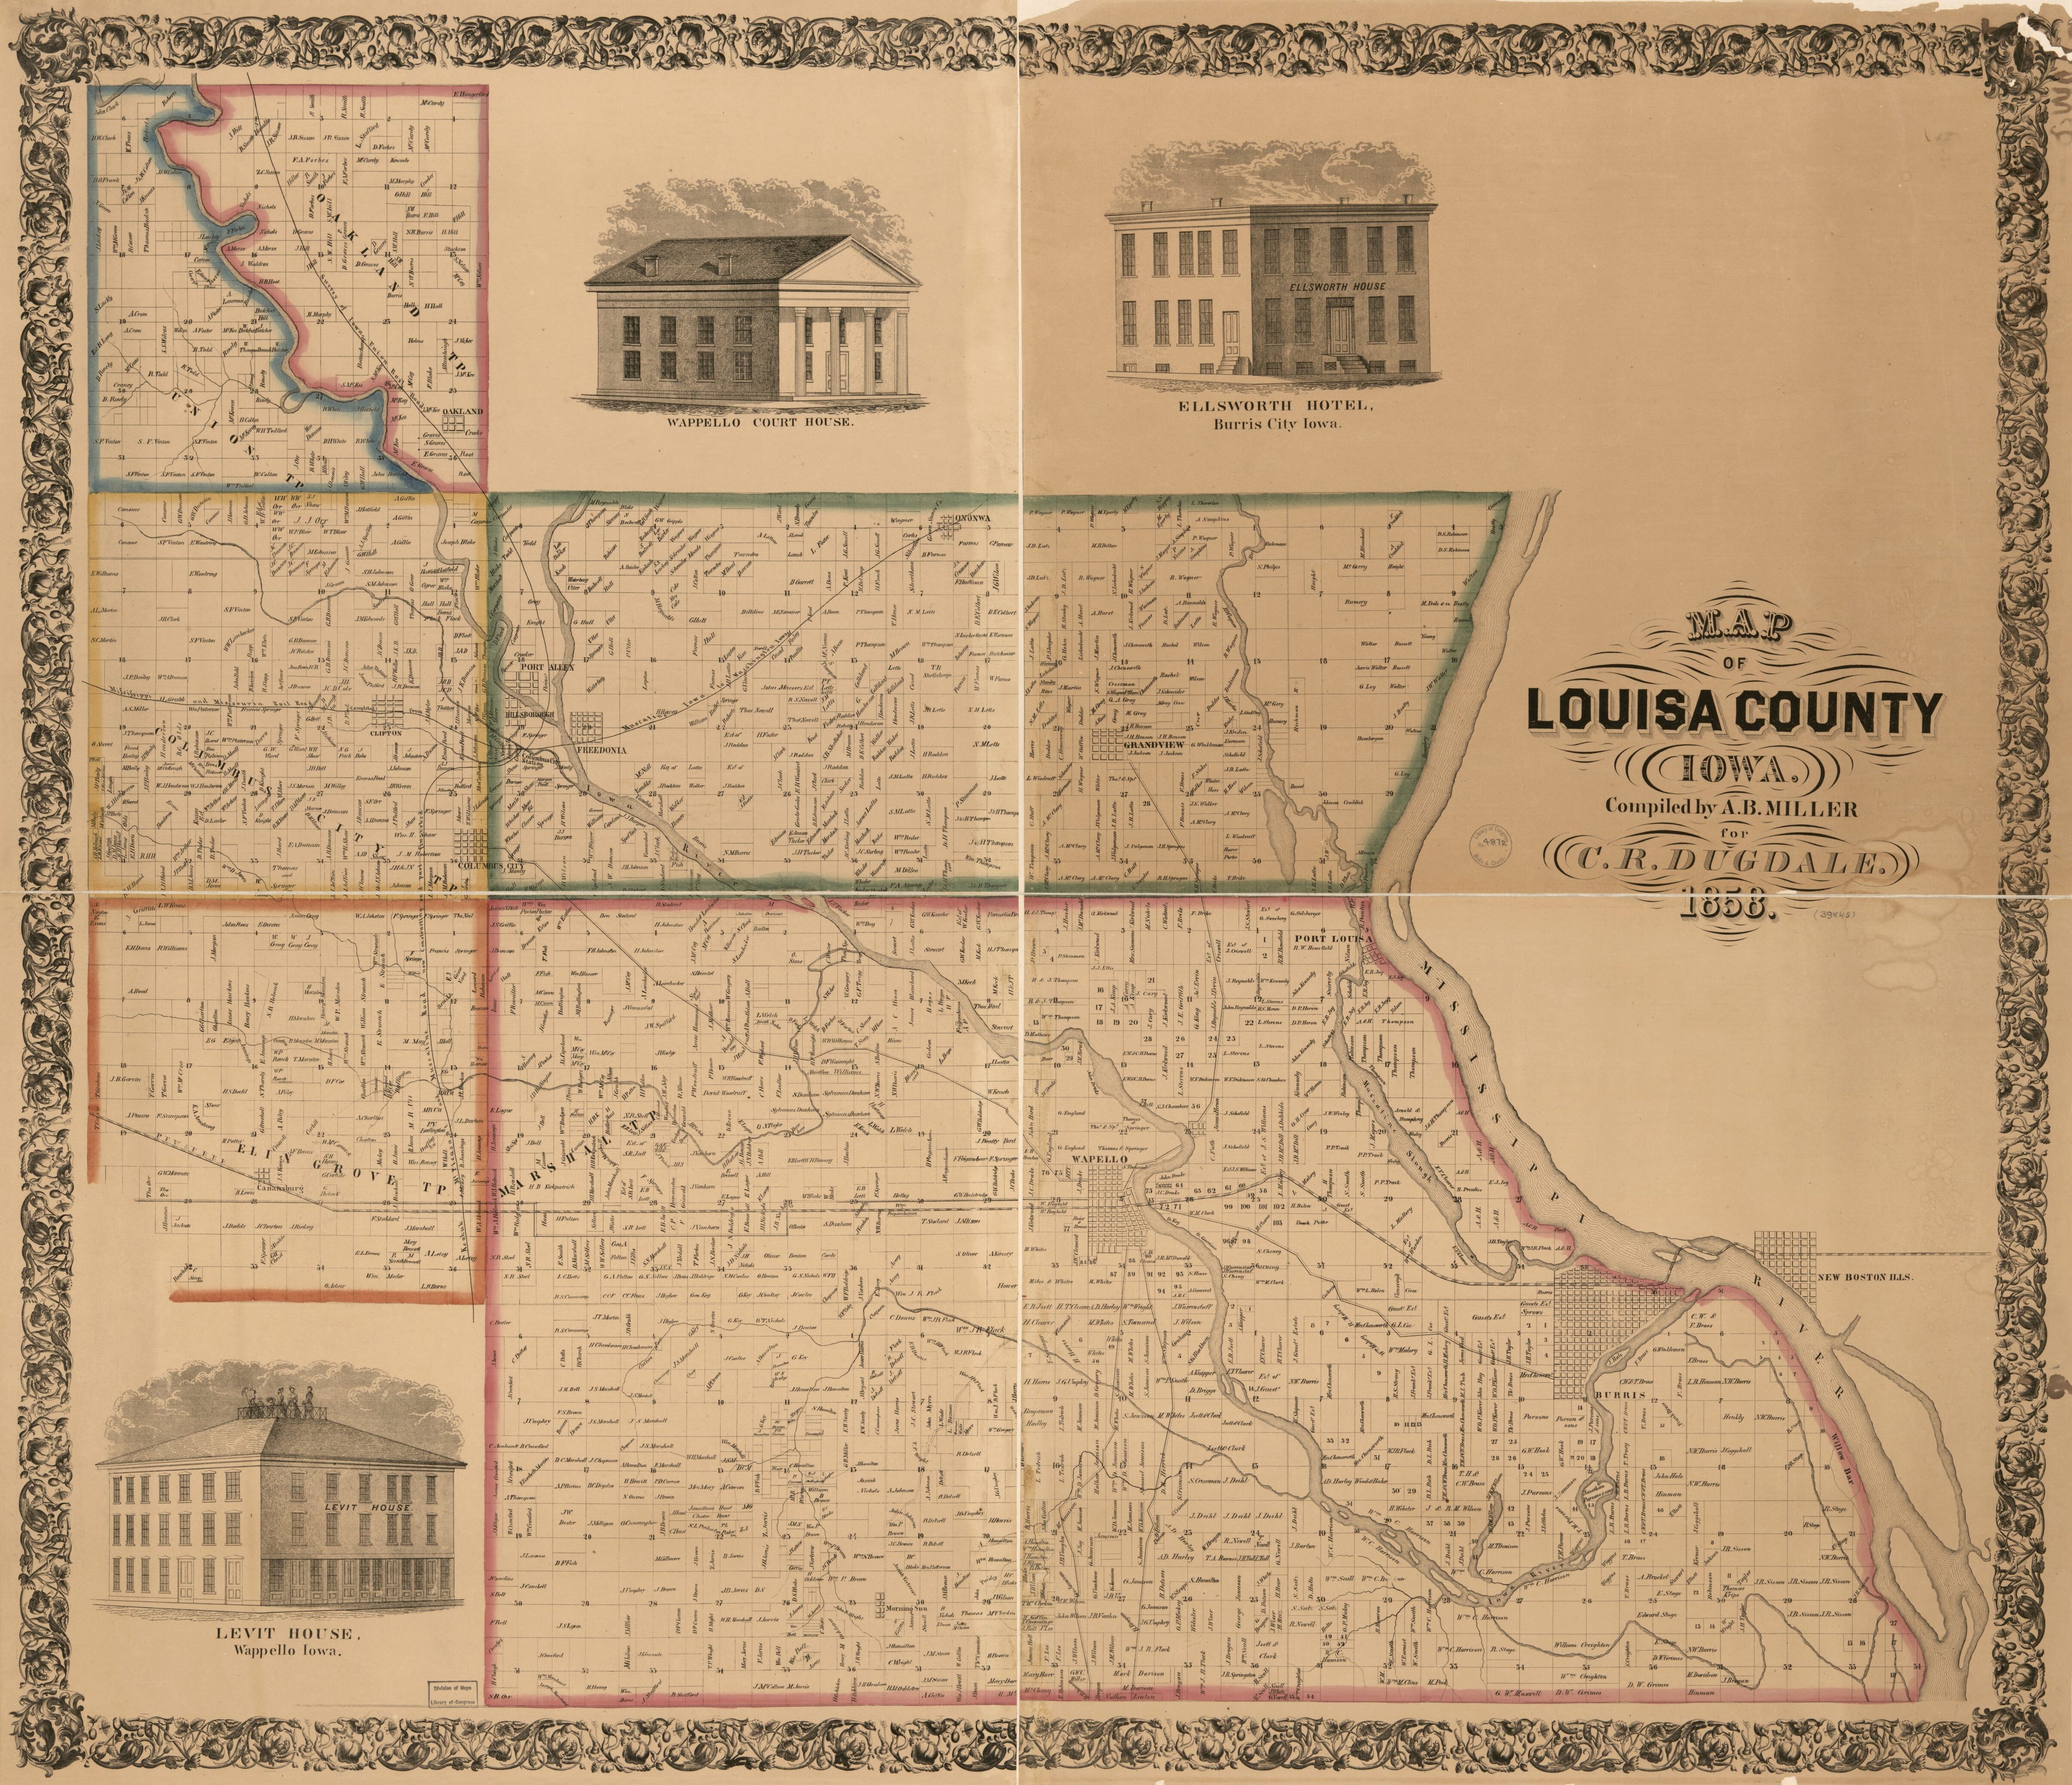 This old map of Map of Louisa County, Iowa from 1858 was created by A. B. Miller in 1858